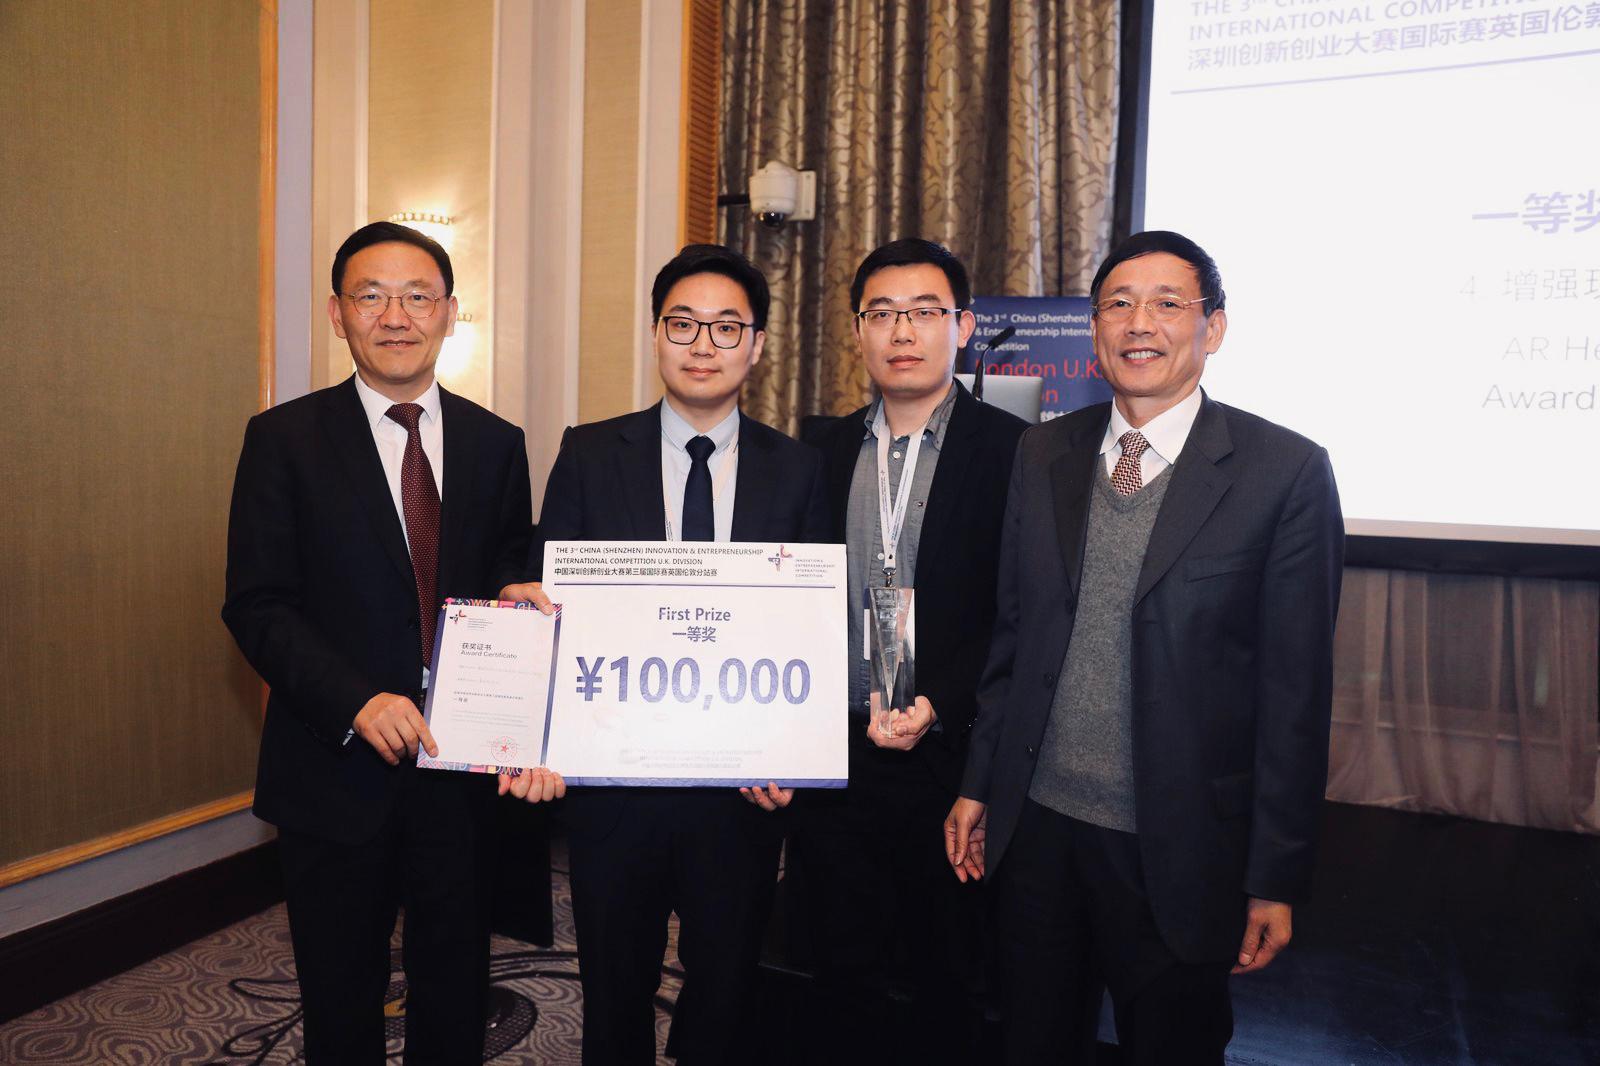 Dr Yuanbo Deng won first prize in the 3rd China(Shenzhen) Innovation & Entrepreneurship International Competition UK Division (2019.03.22)